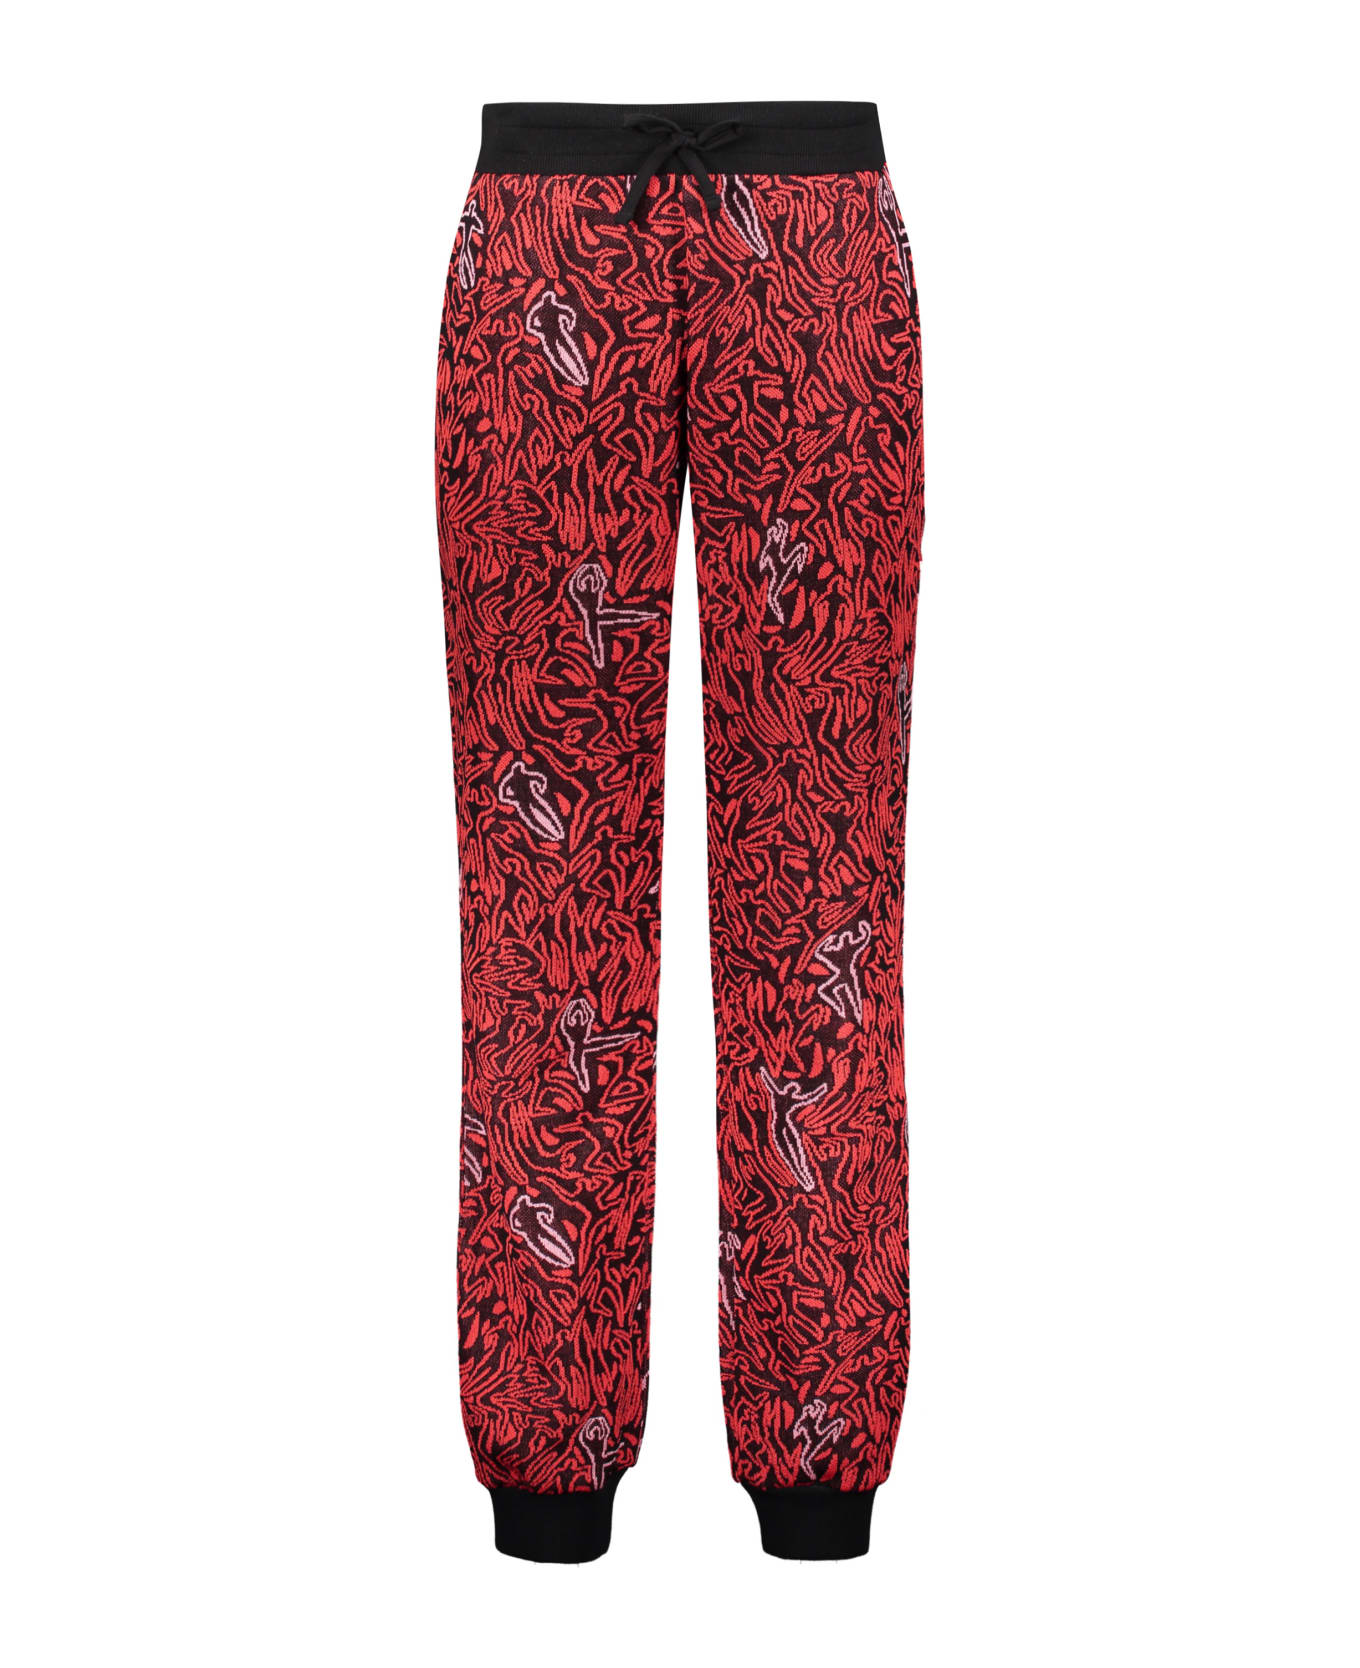 M Missoni Knitted Trousers - red スウェットパンツ